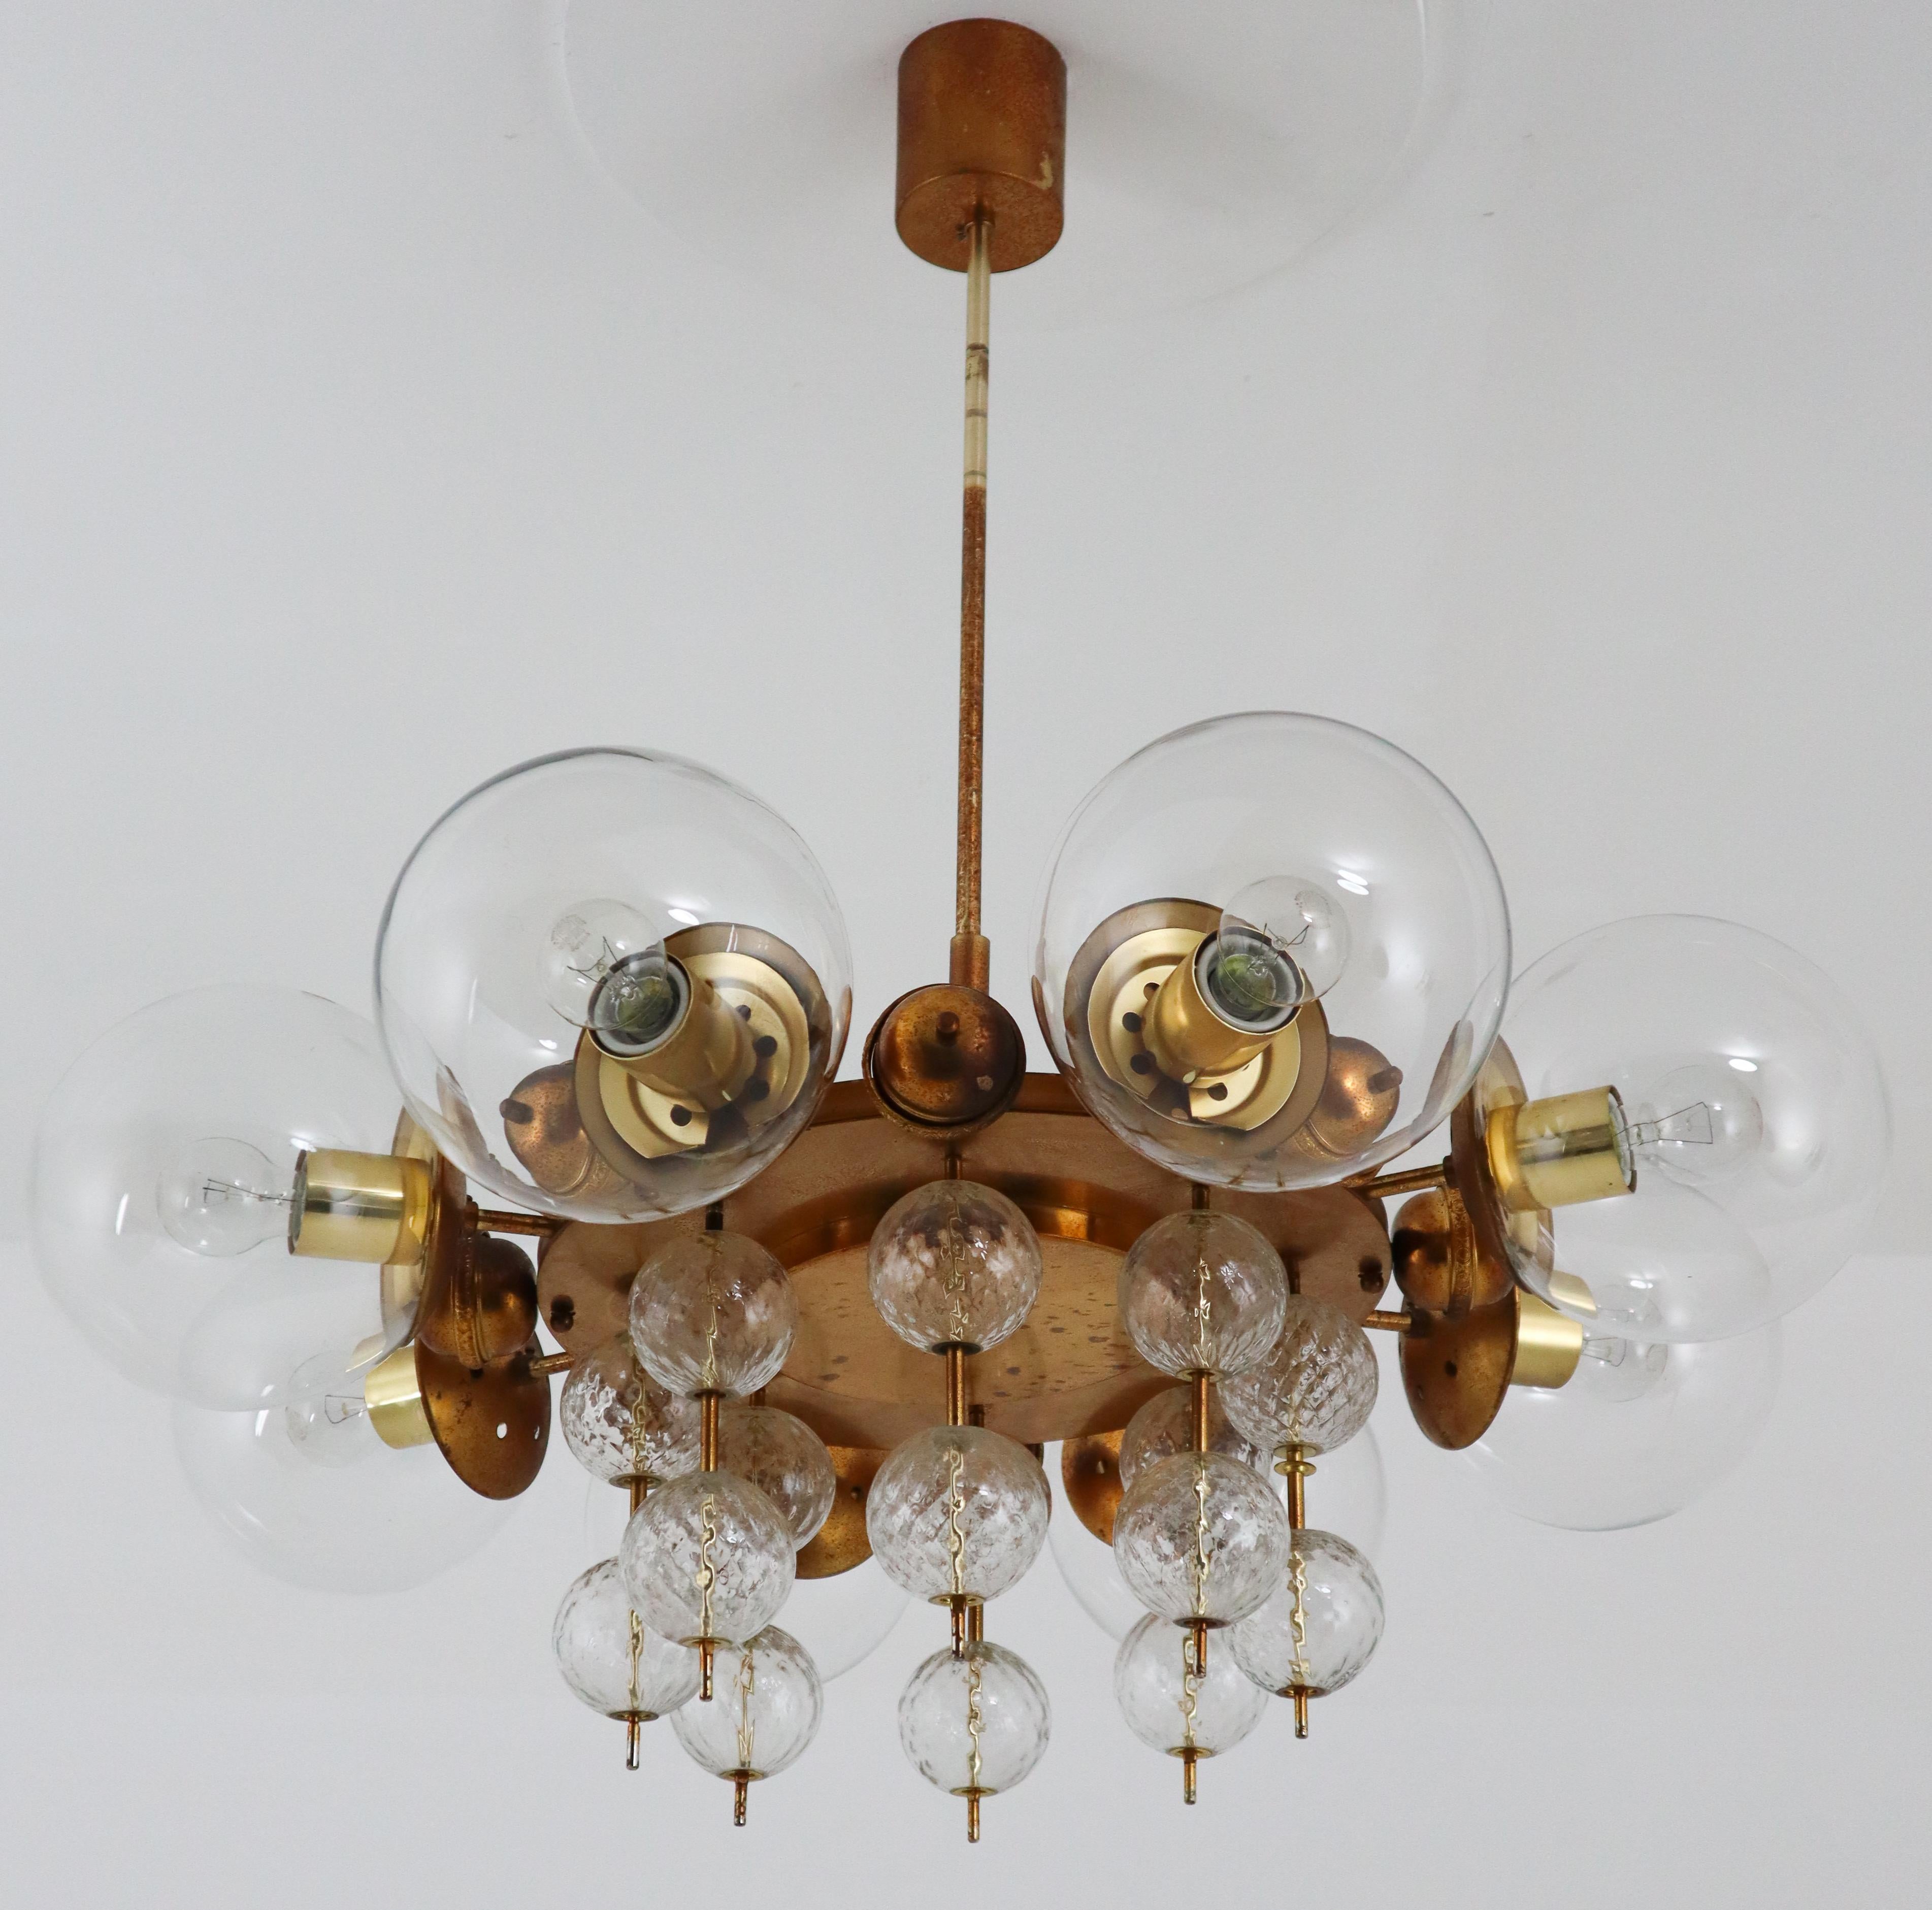 Midcentury chandelier with patinated brass fixture, Europe, 1950s

This patinated brass chandelier was produced in Europe in the 1950s. A spirited and chic design set chandeliers with brass fixture and hand blown glass. The chandelier with brass